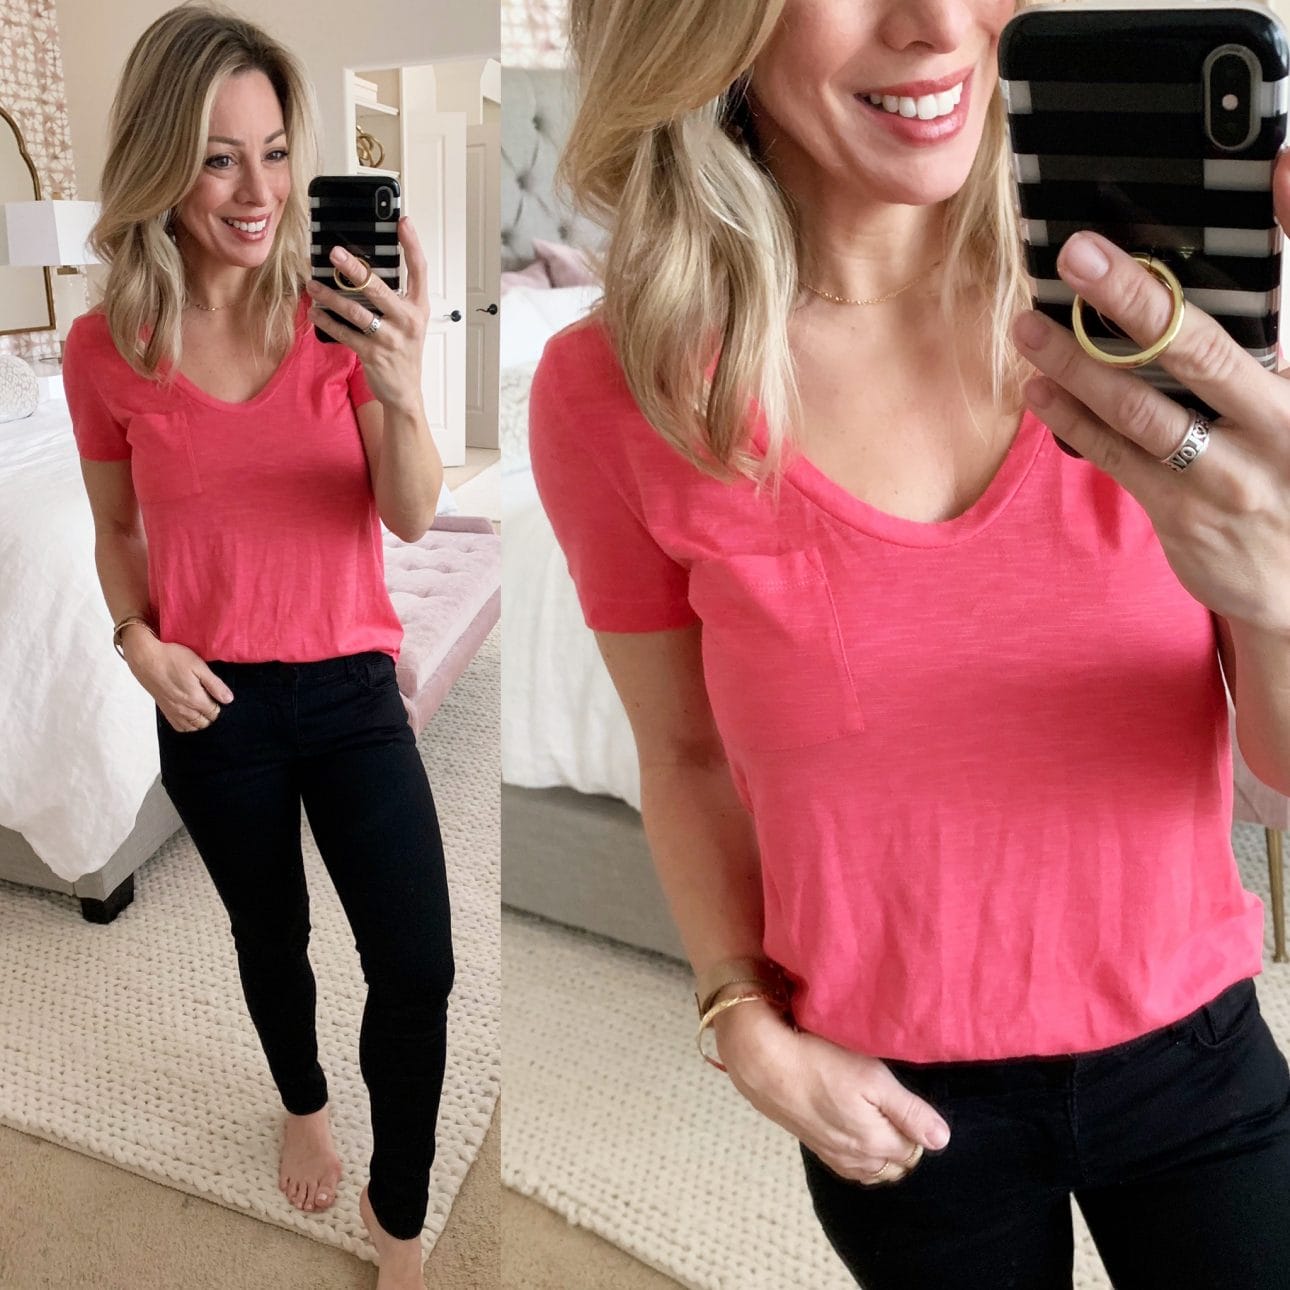 Cute casual outfit - pocket t shirt and black jeans